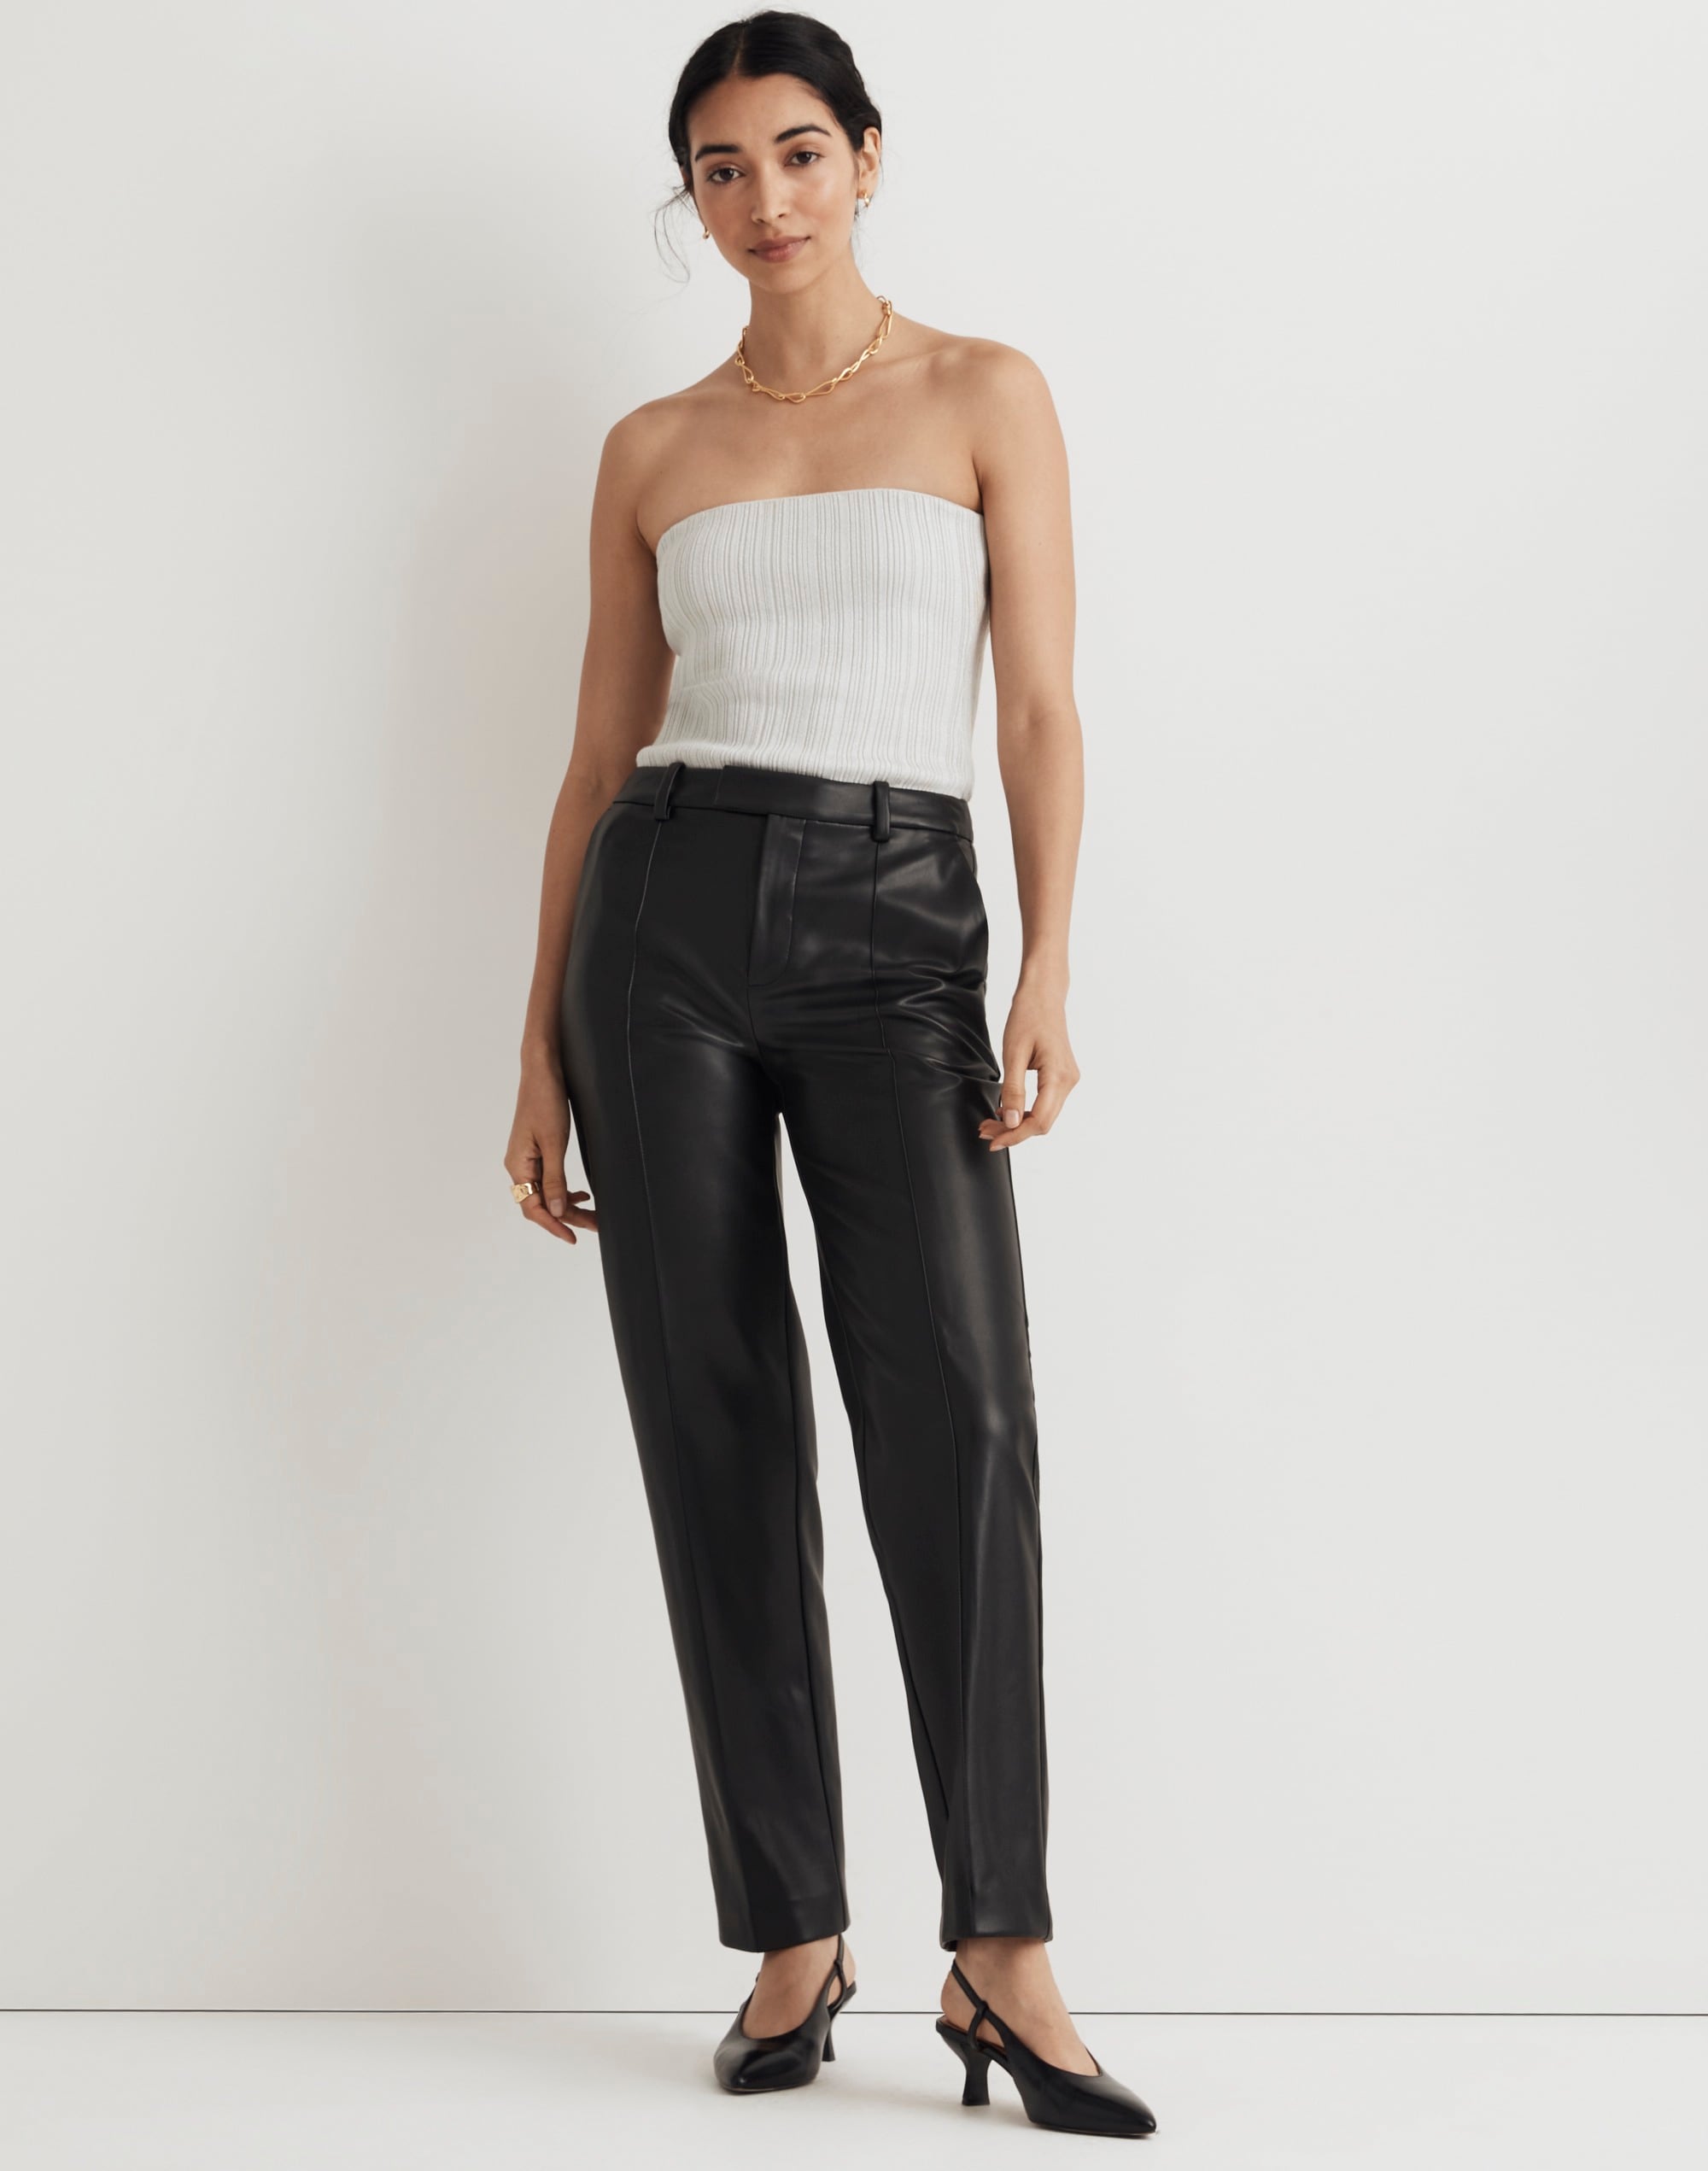 Madewell x Aimee Song Slim Tapered Pants Faux Leather